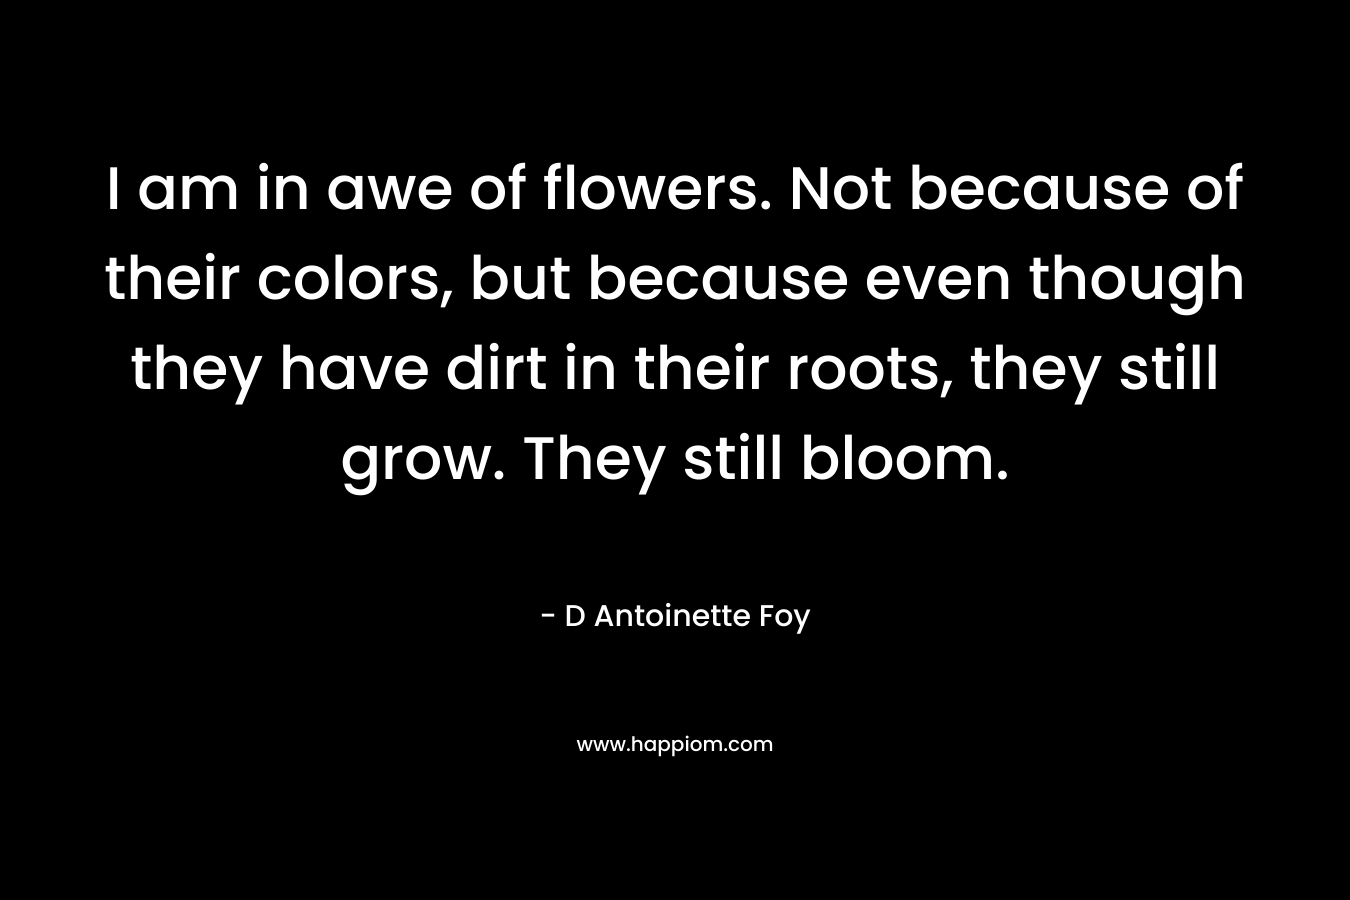 I am in awe of flowers. Not because of their colors, but because even though they have dirt in their roots, they still grow. They still bloom. – D Antoinette Foy